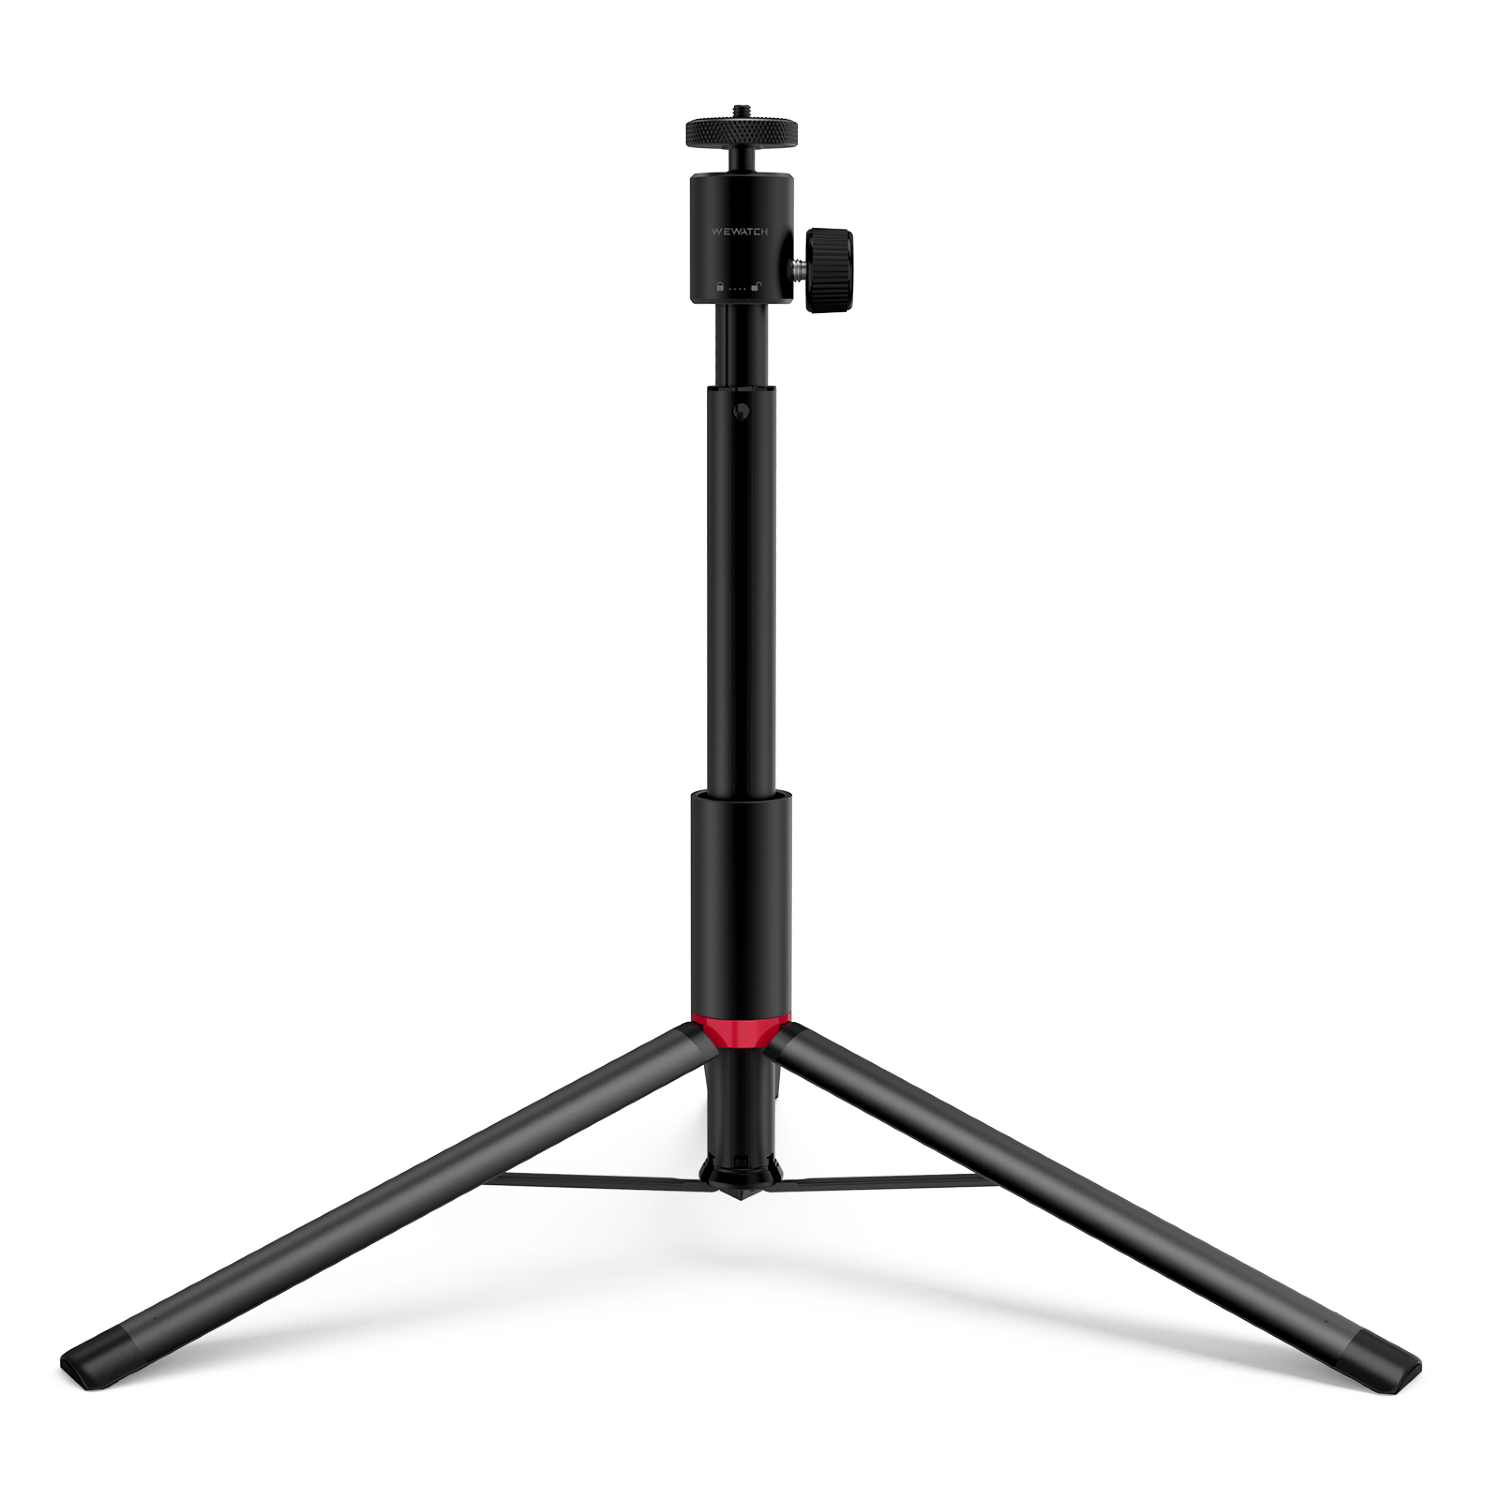 31" WEWATCH PS201 Universal Aluminum Alloy Tripod with 360 Degree Panorama, One button Open/Close for Projector, Camera, Cellphone $22 + Free Shipping